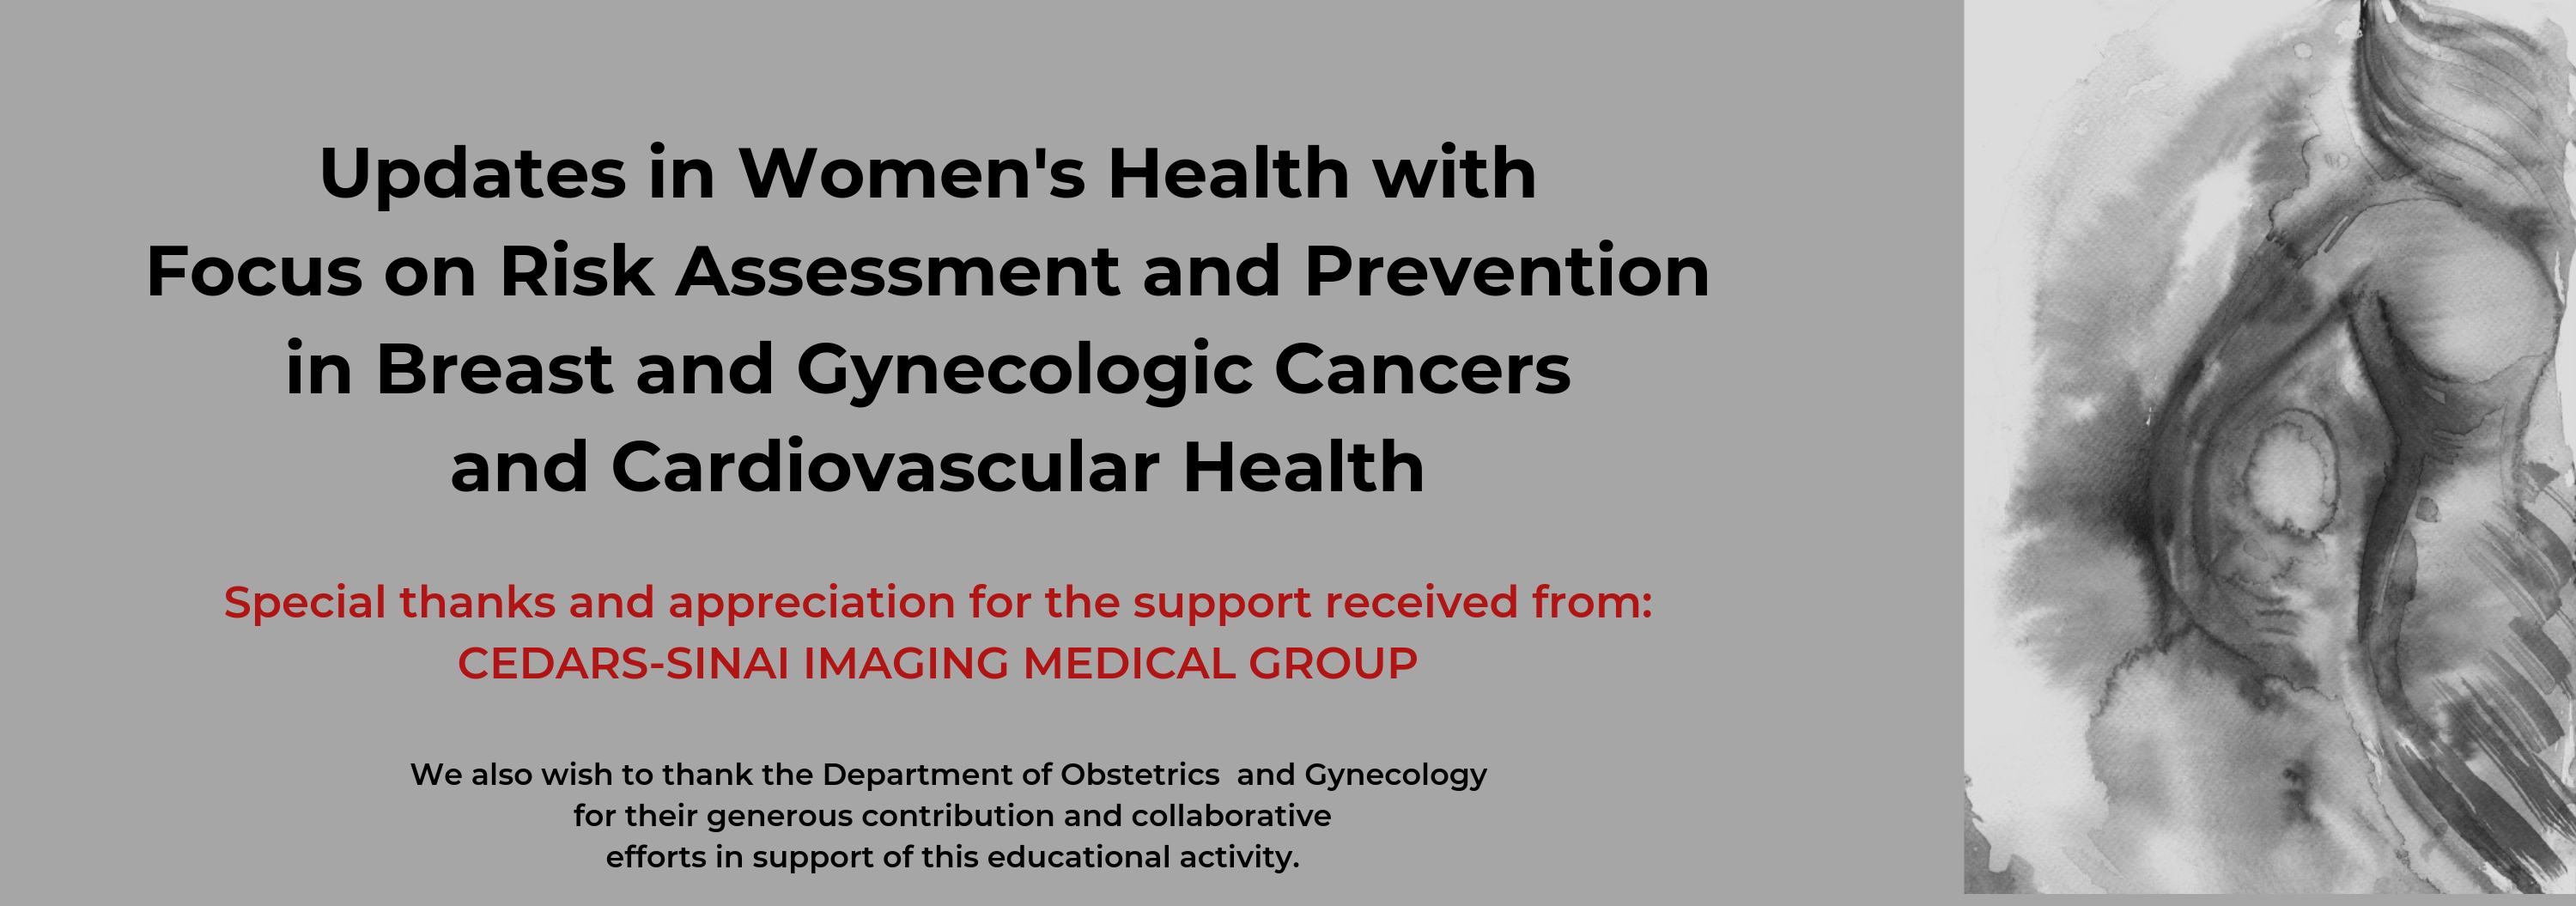 Updates in Women's Health with Focus on Risk Assessment and Prevention in Breast and Gynecologic Cancers and Cardiovascular Health Banner